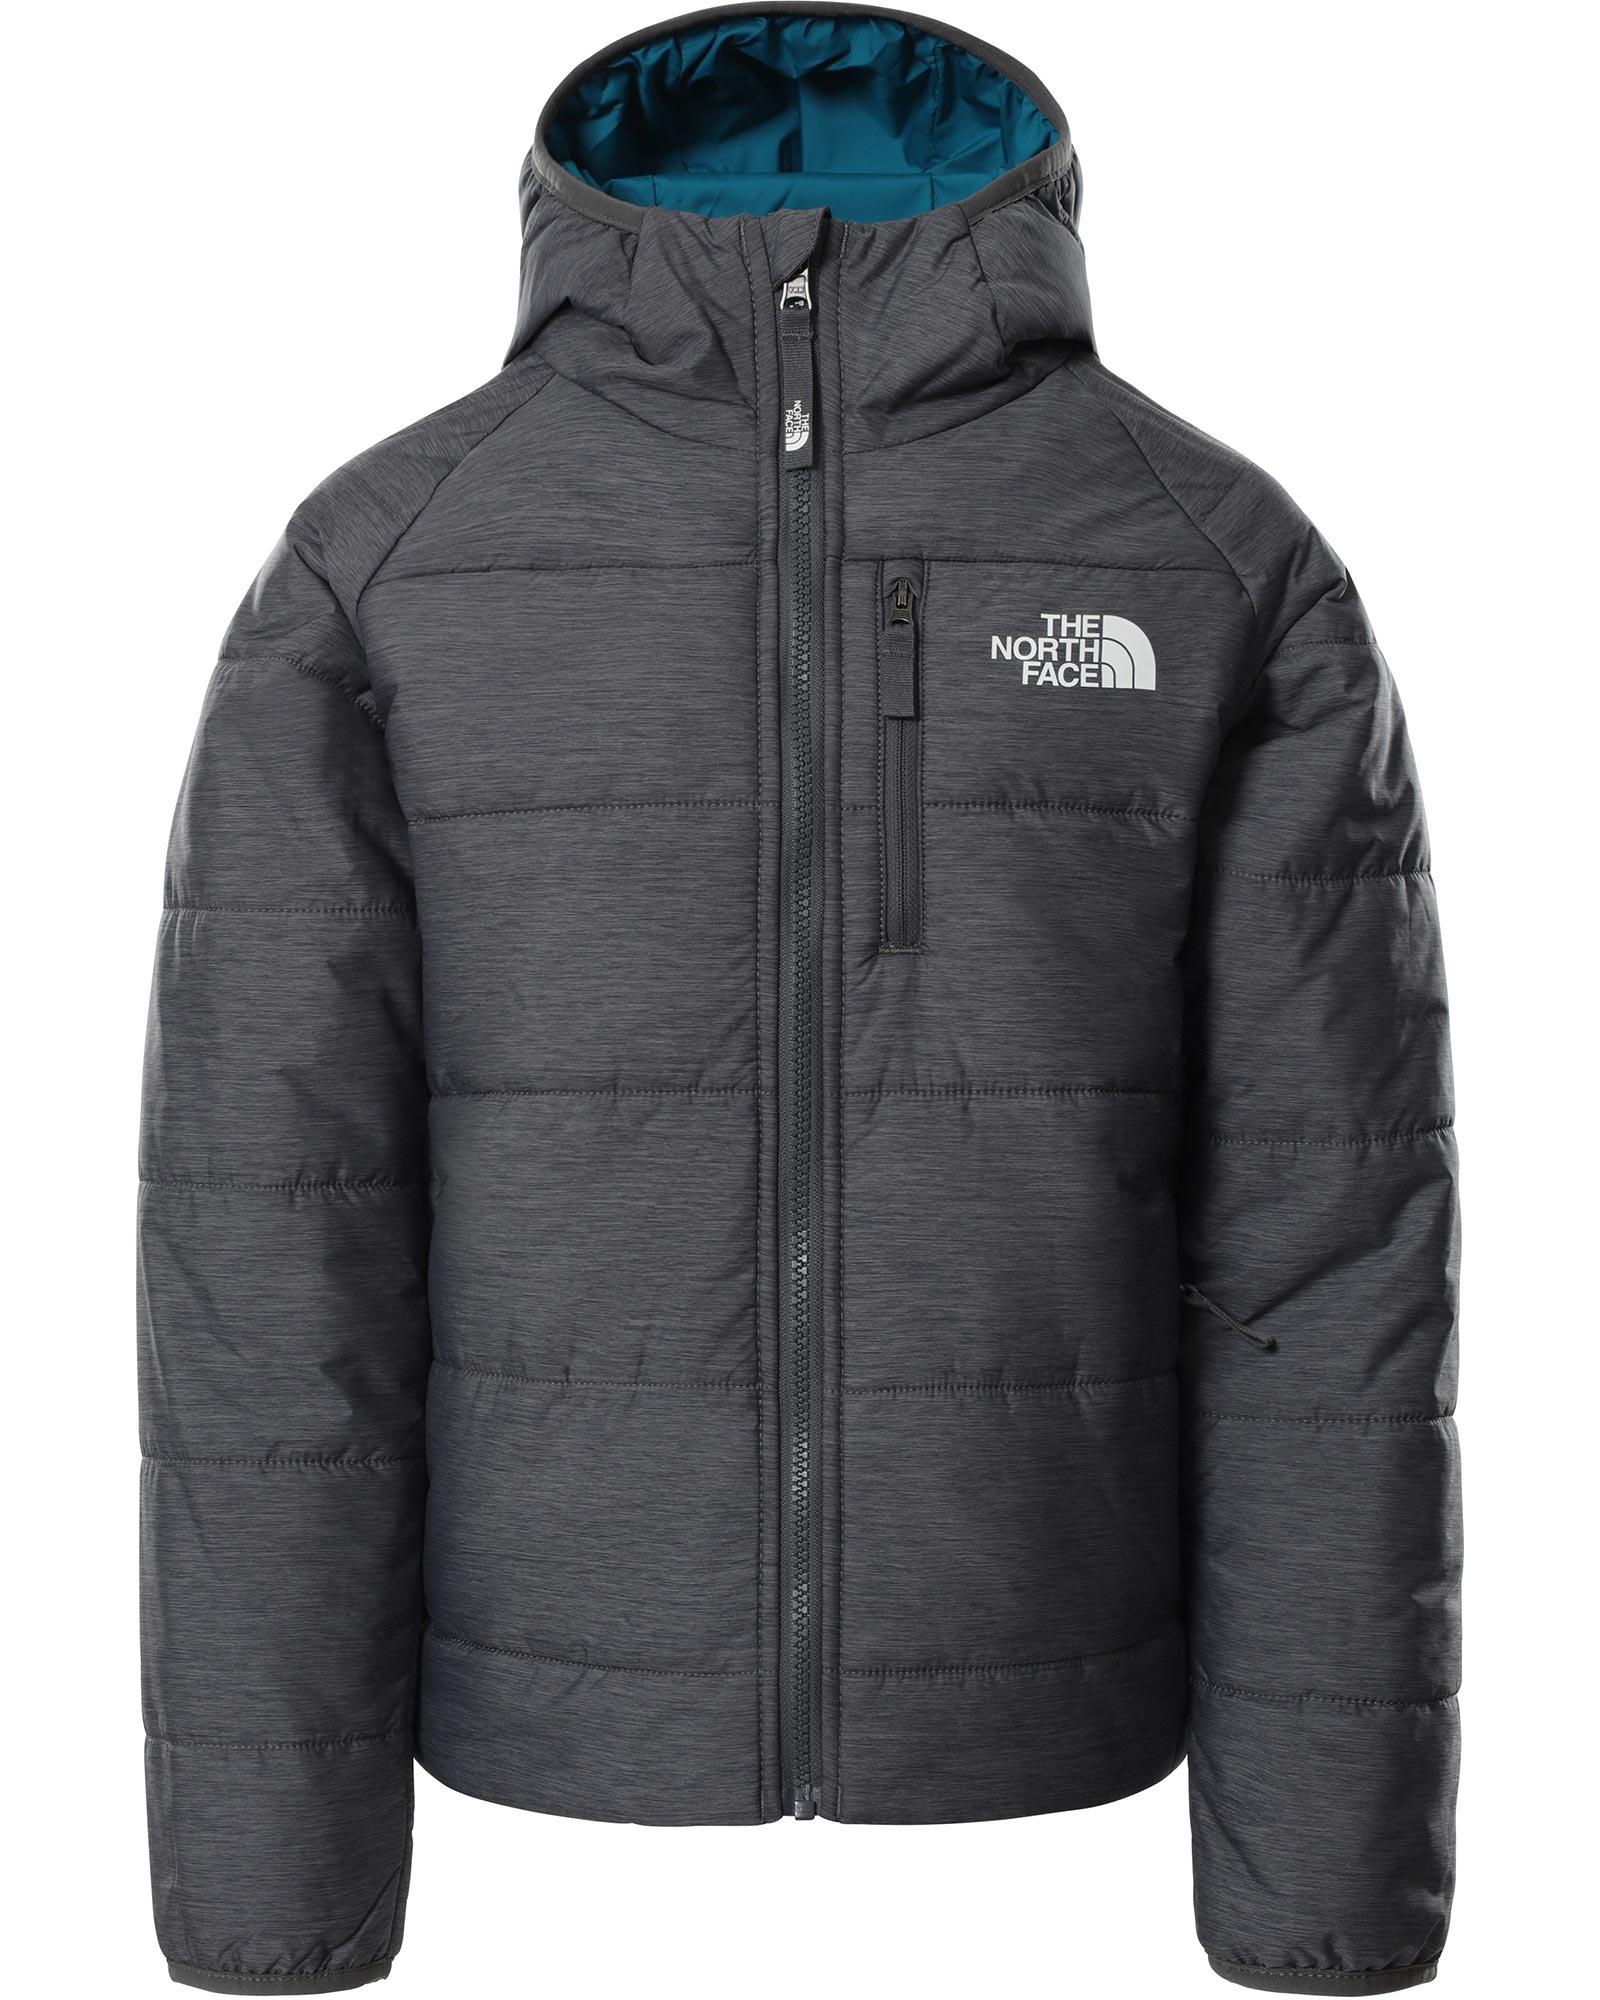 Product image of The North Face Reversible Perrito Girls' Jacket